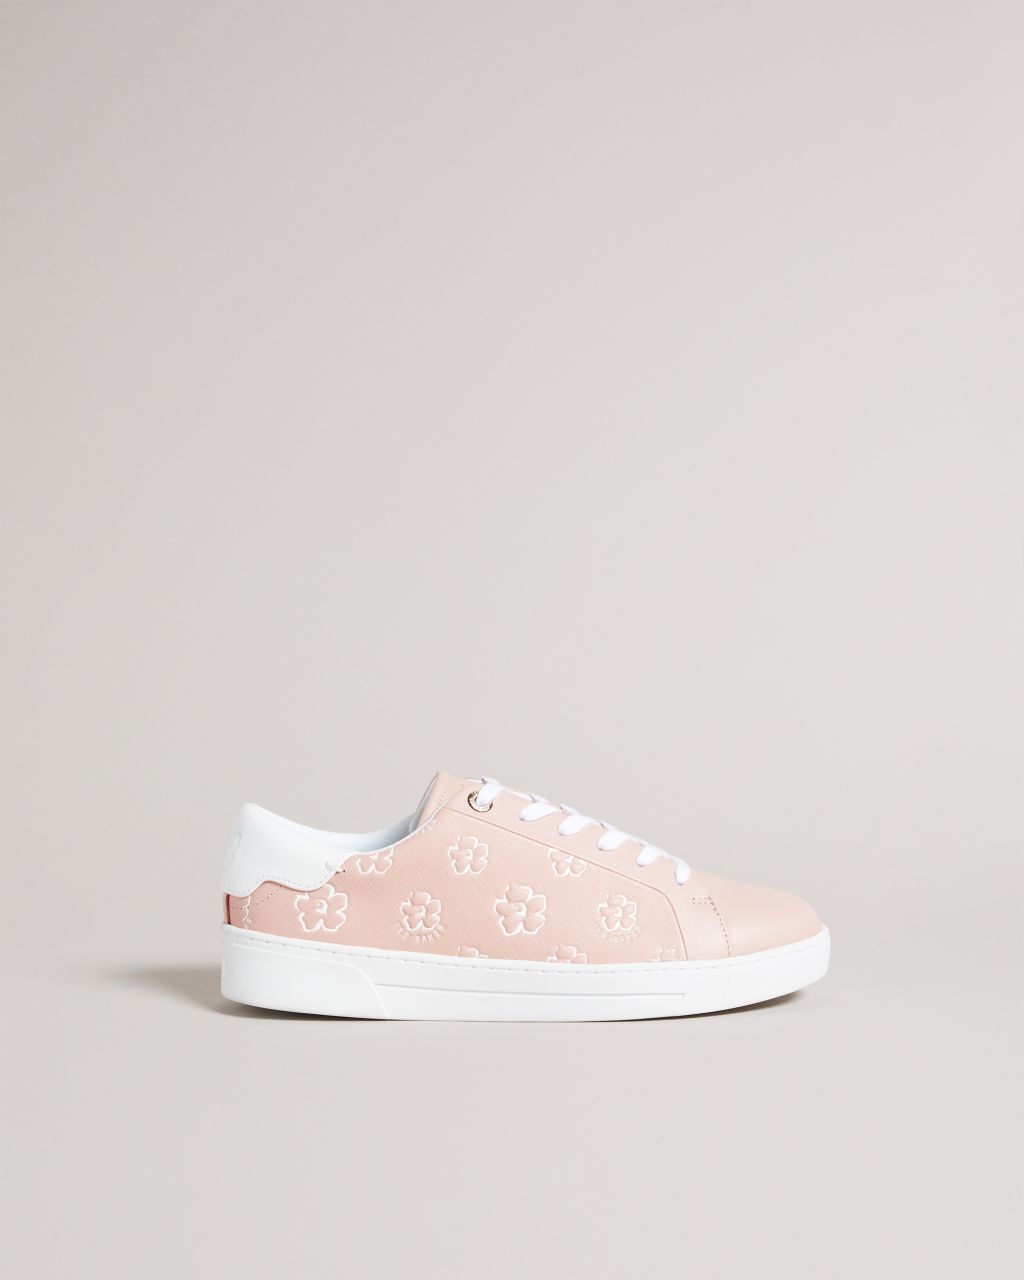 Ted Baker Women's Magnolia Flower Cupsole Trainer in Dusky Pink, Taliy, Leather